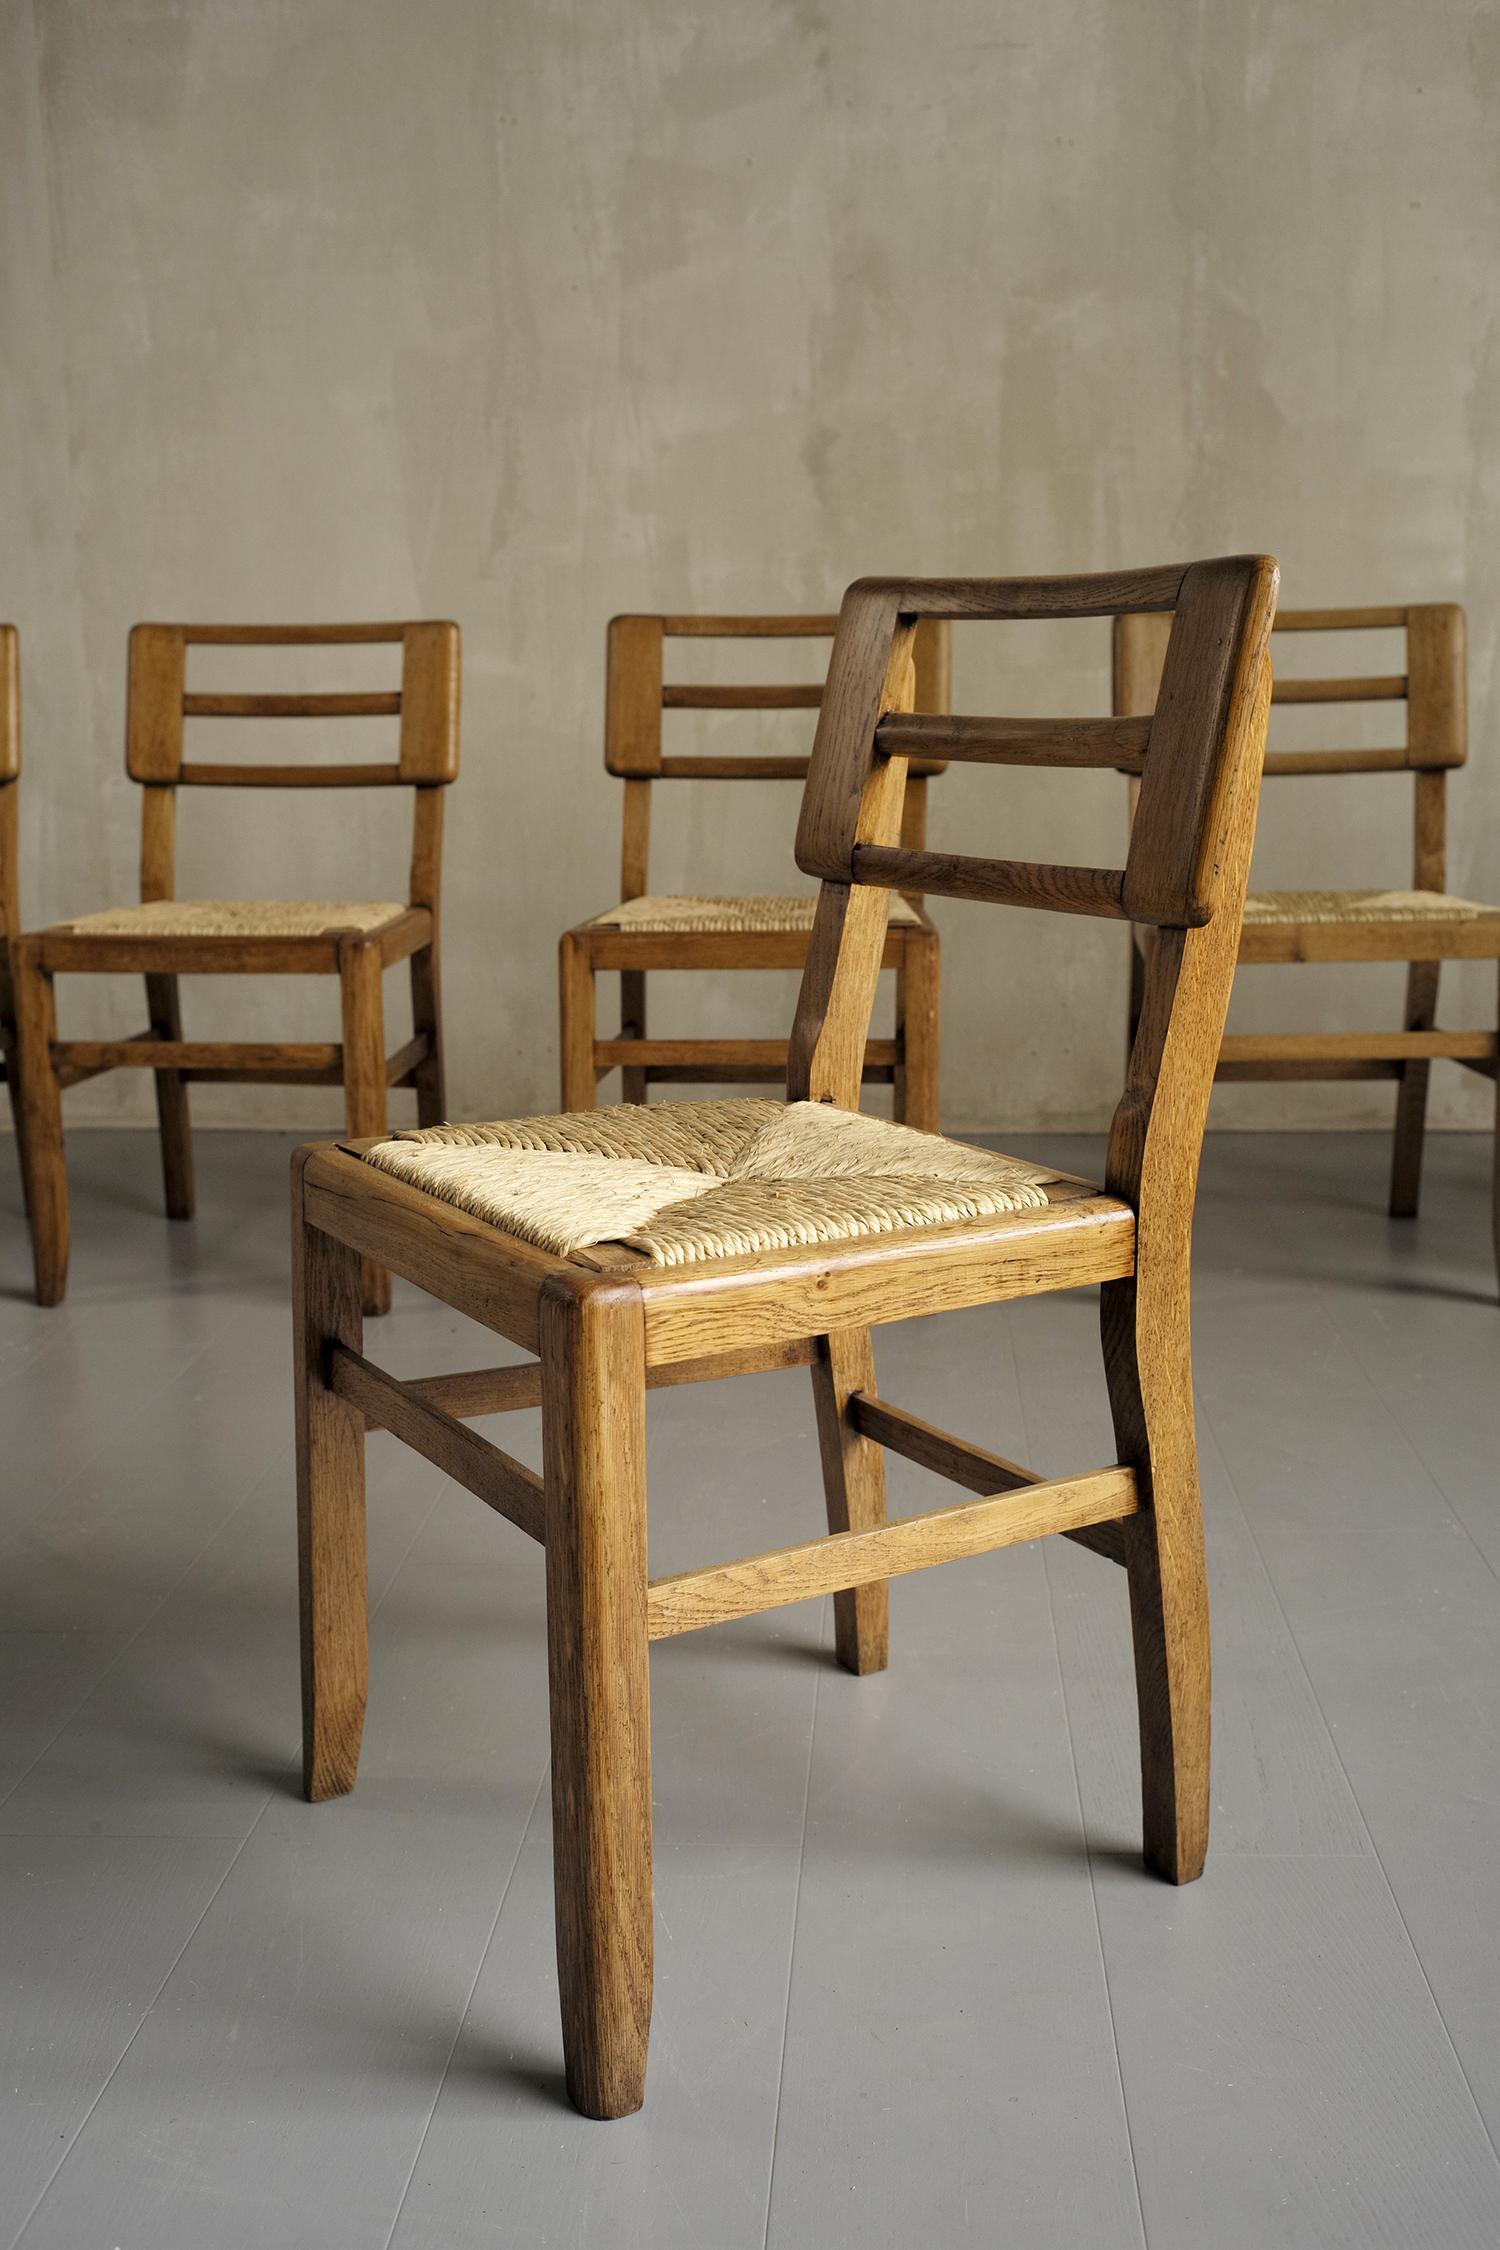 Pierre Cruège, Set of 6 Straw Chairs, France, 1950 For Sale 2